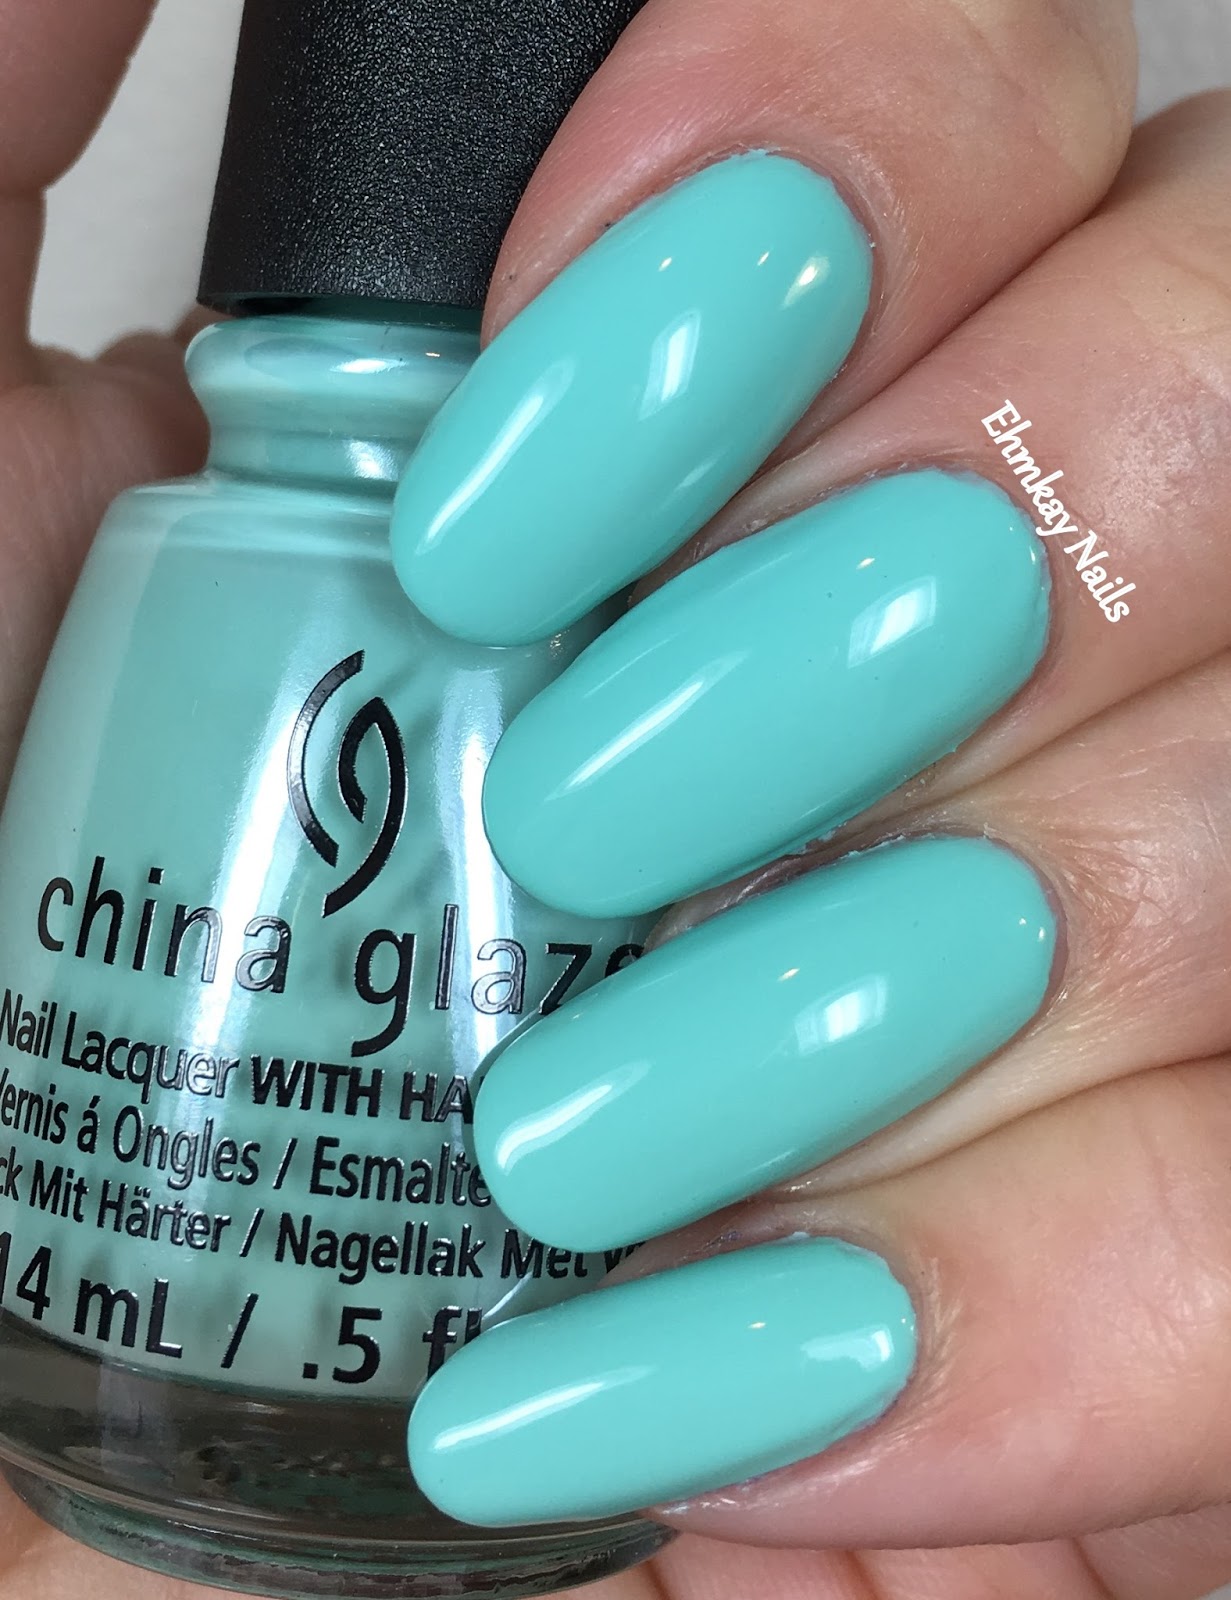 ehmkay nails China Glaze Summer Reign Collection, Swatches and Review